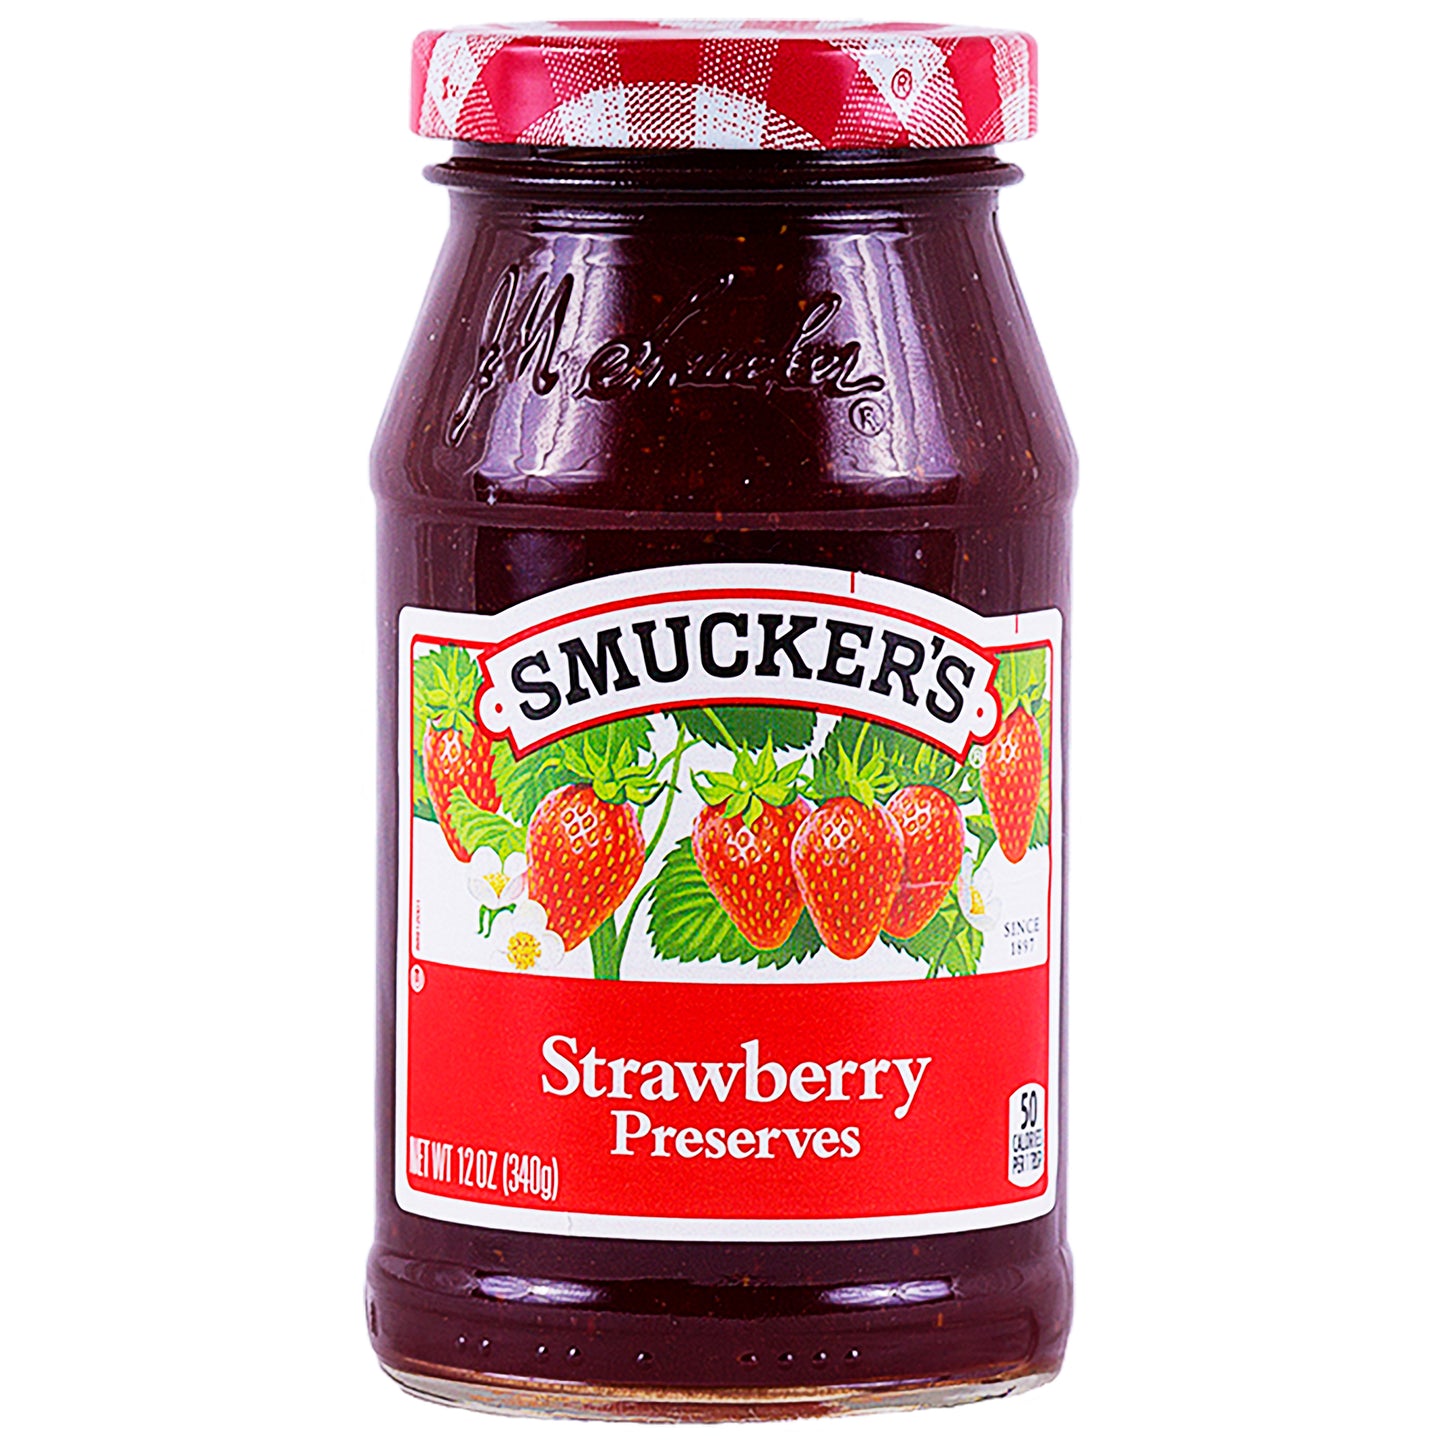 SMUCKERS STRAWBERRY PRESERVES